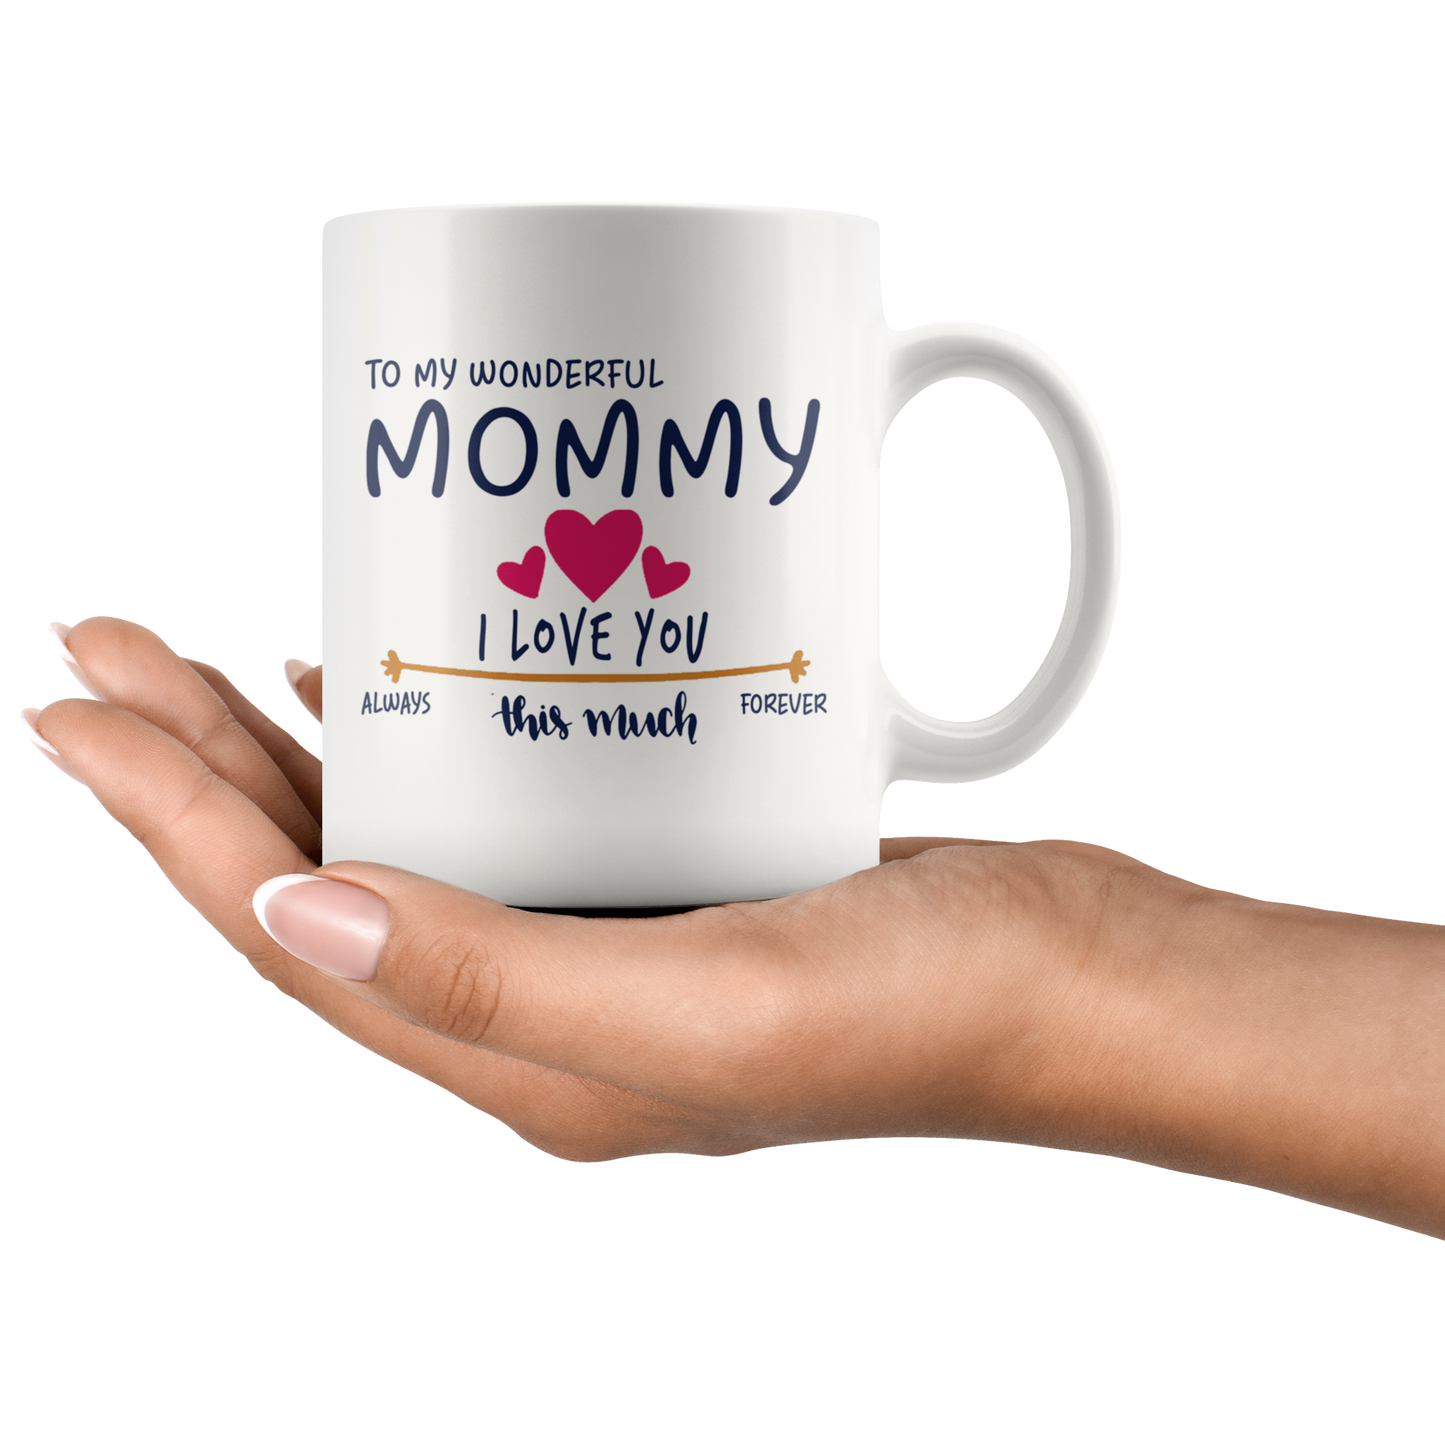 M-20470216-sp-24162 - [ Mommy | 1 ]Mom Day Gifts From Daughter or Son - To My Wonderful Mommy I